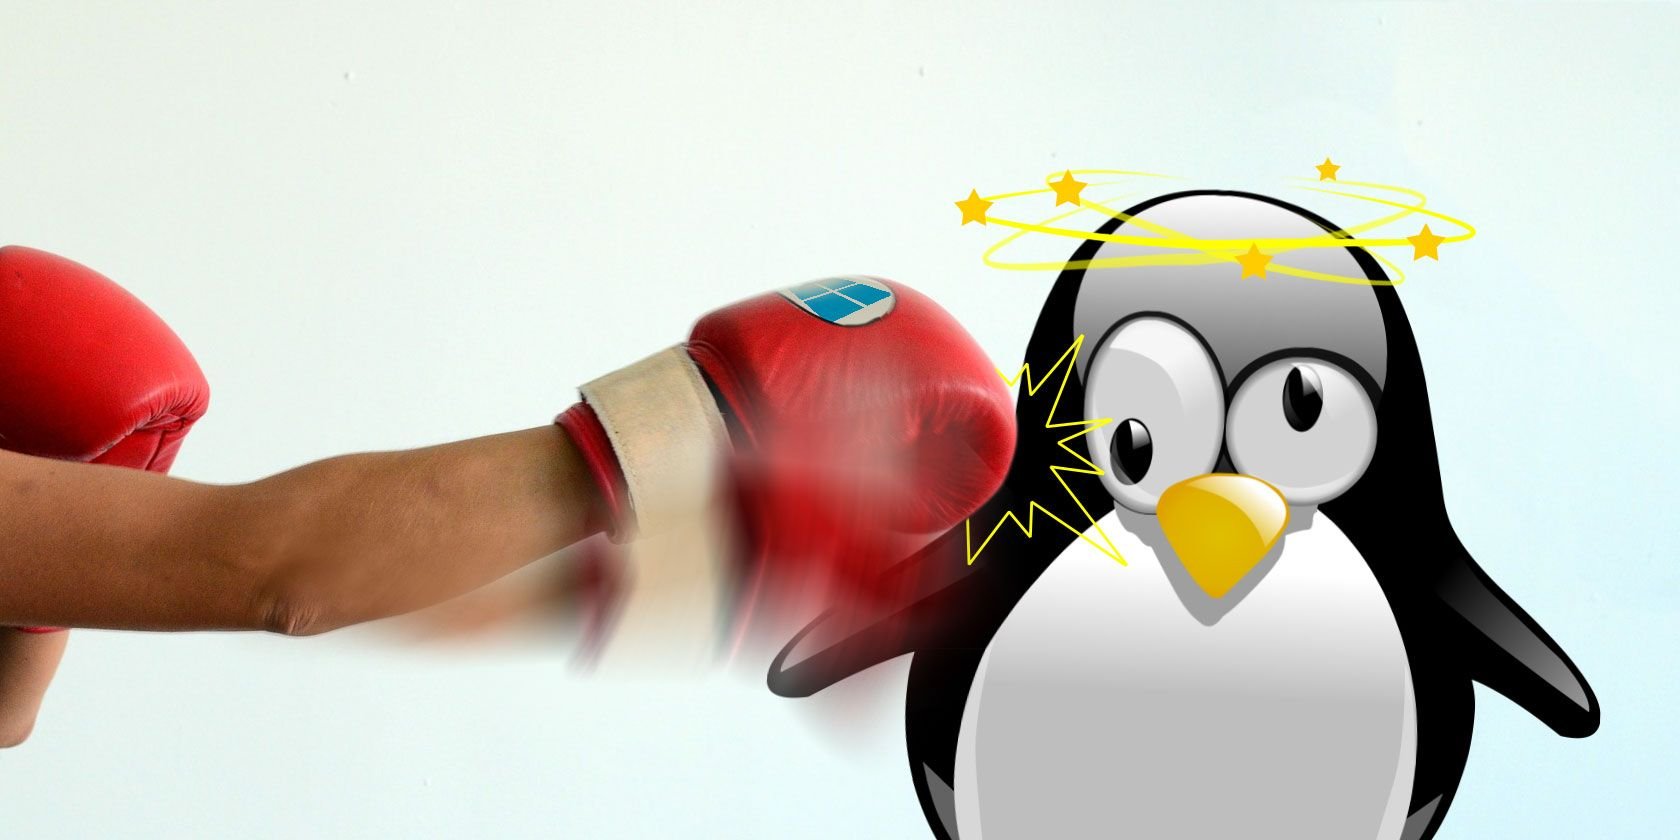 10 Reasons Why Windows Is Still Better Than Linux